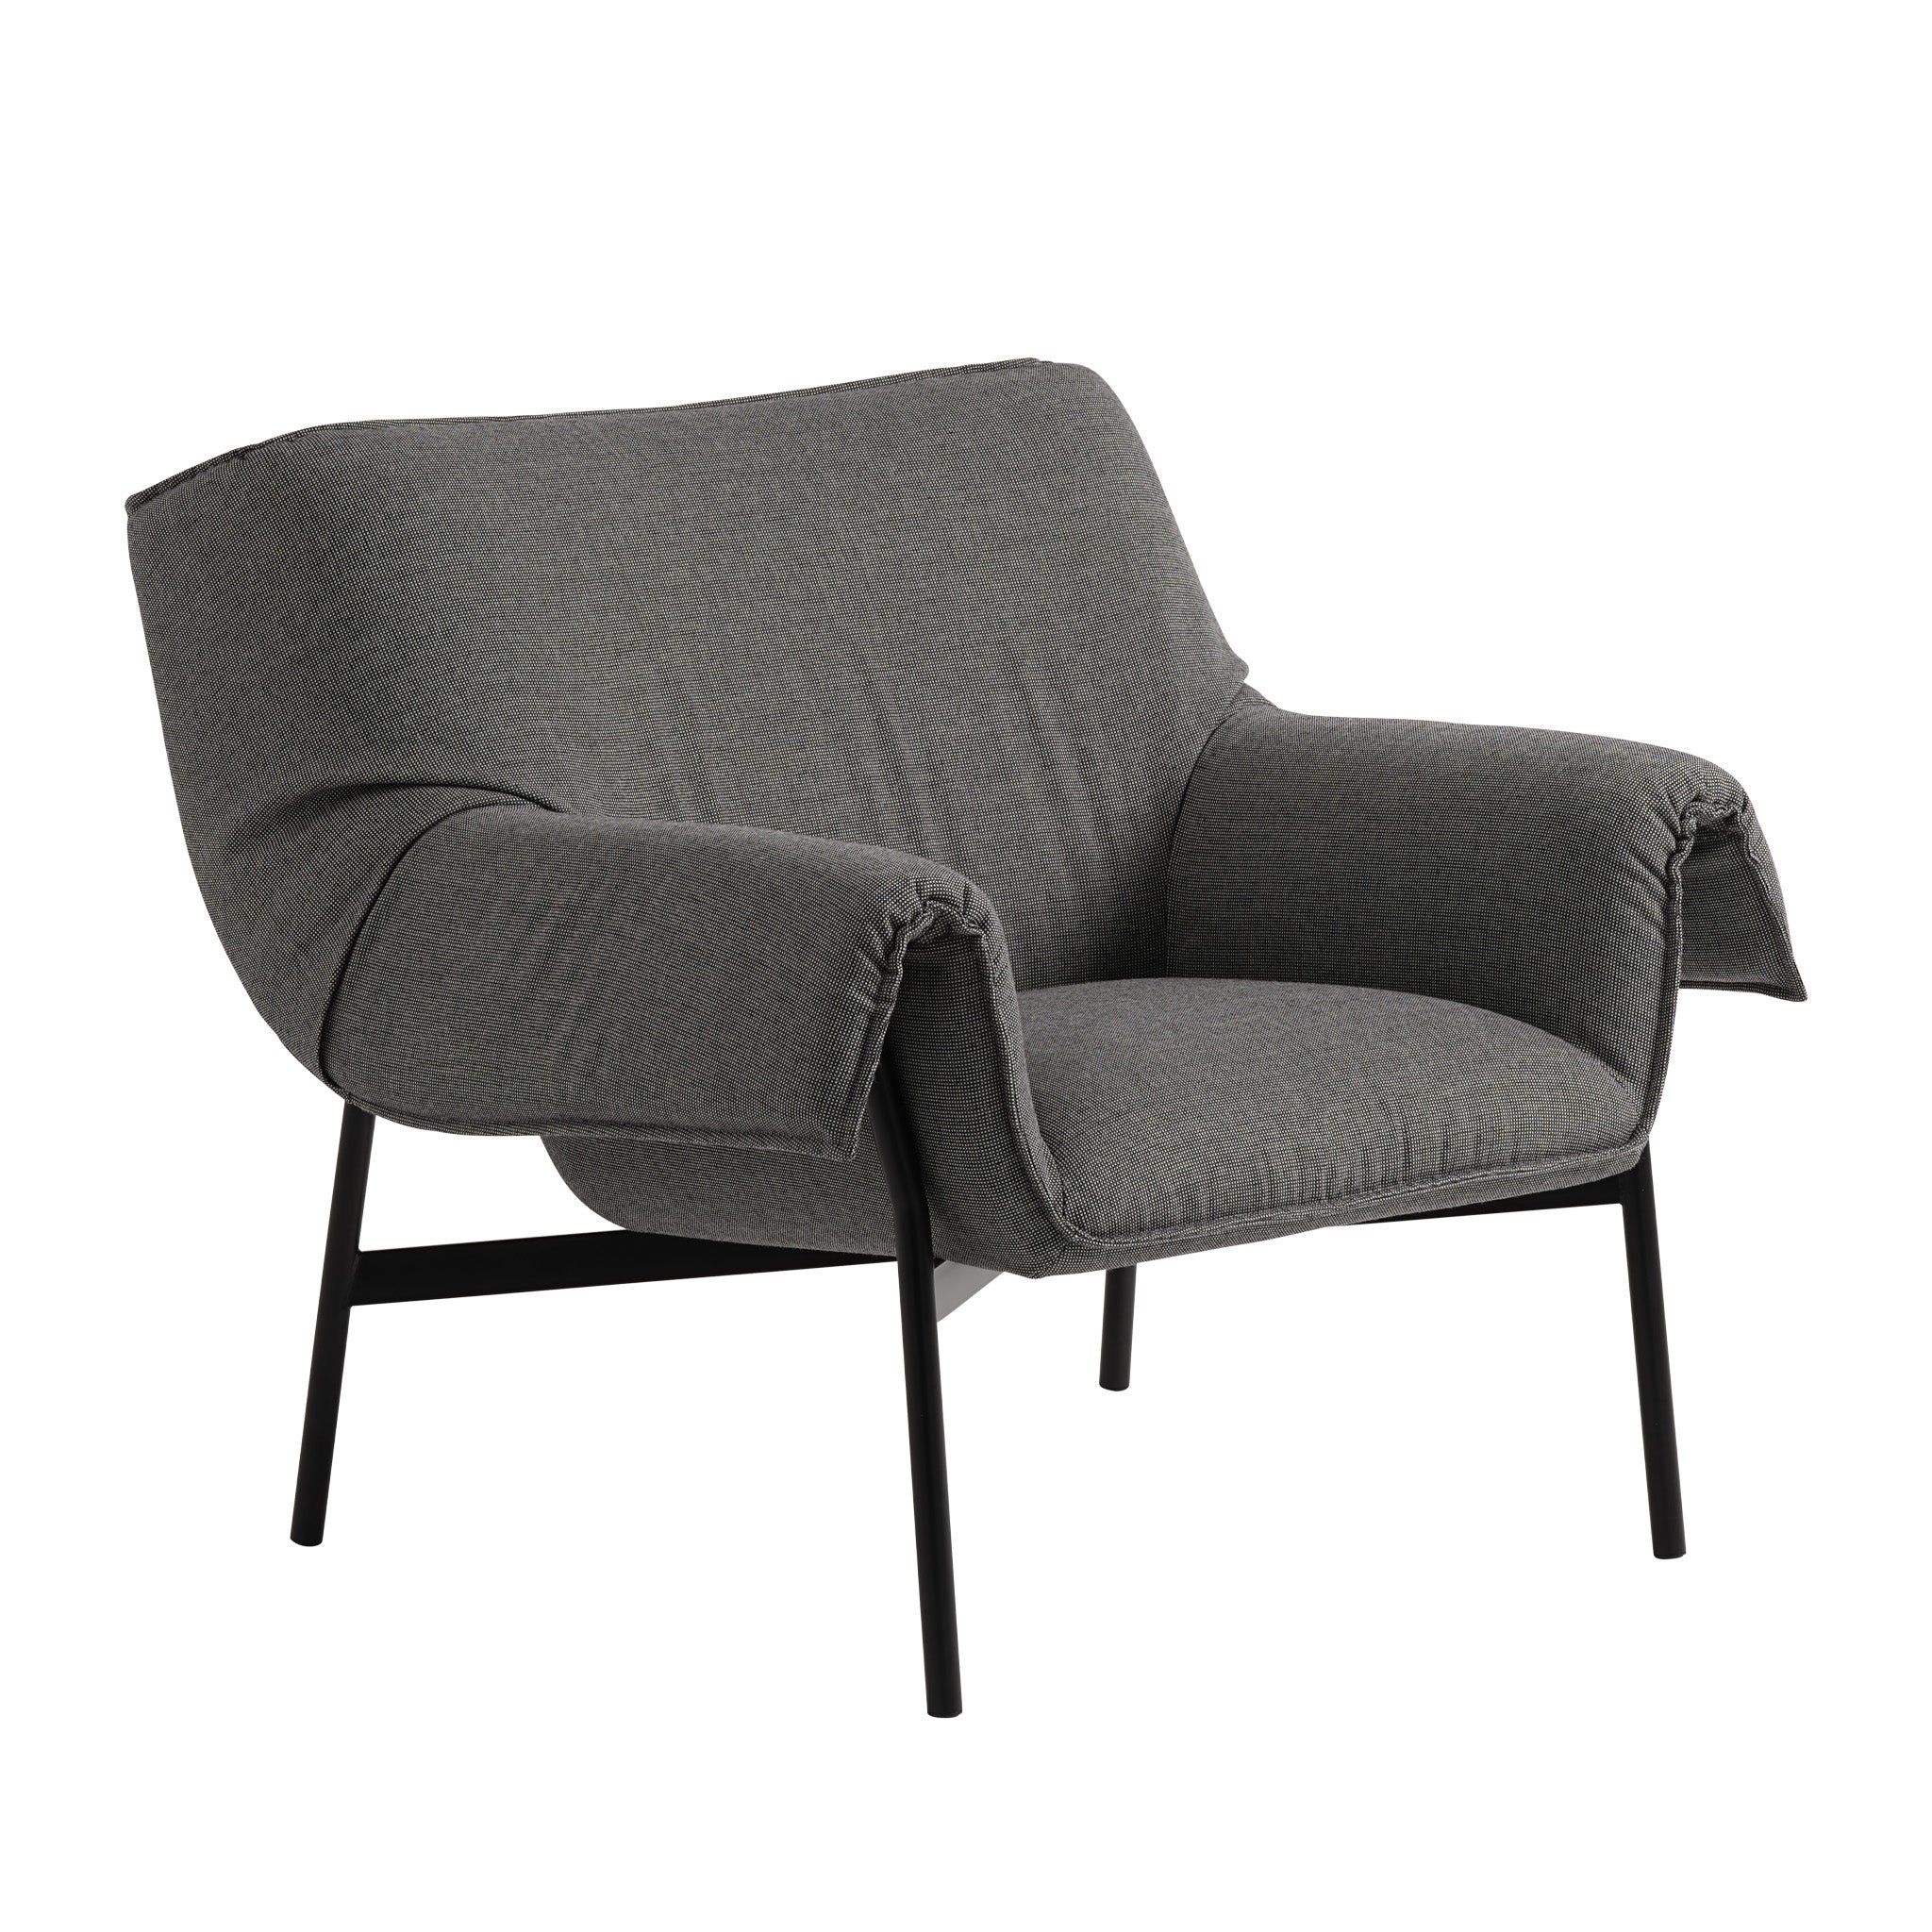 Wrap Lounge Chair By Normal Studio for Muuto